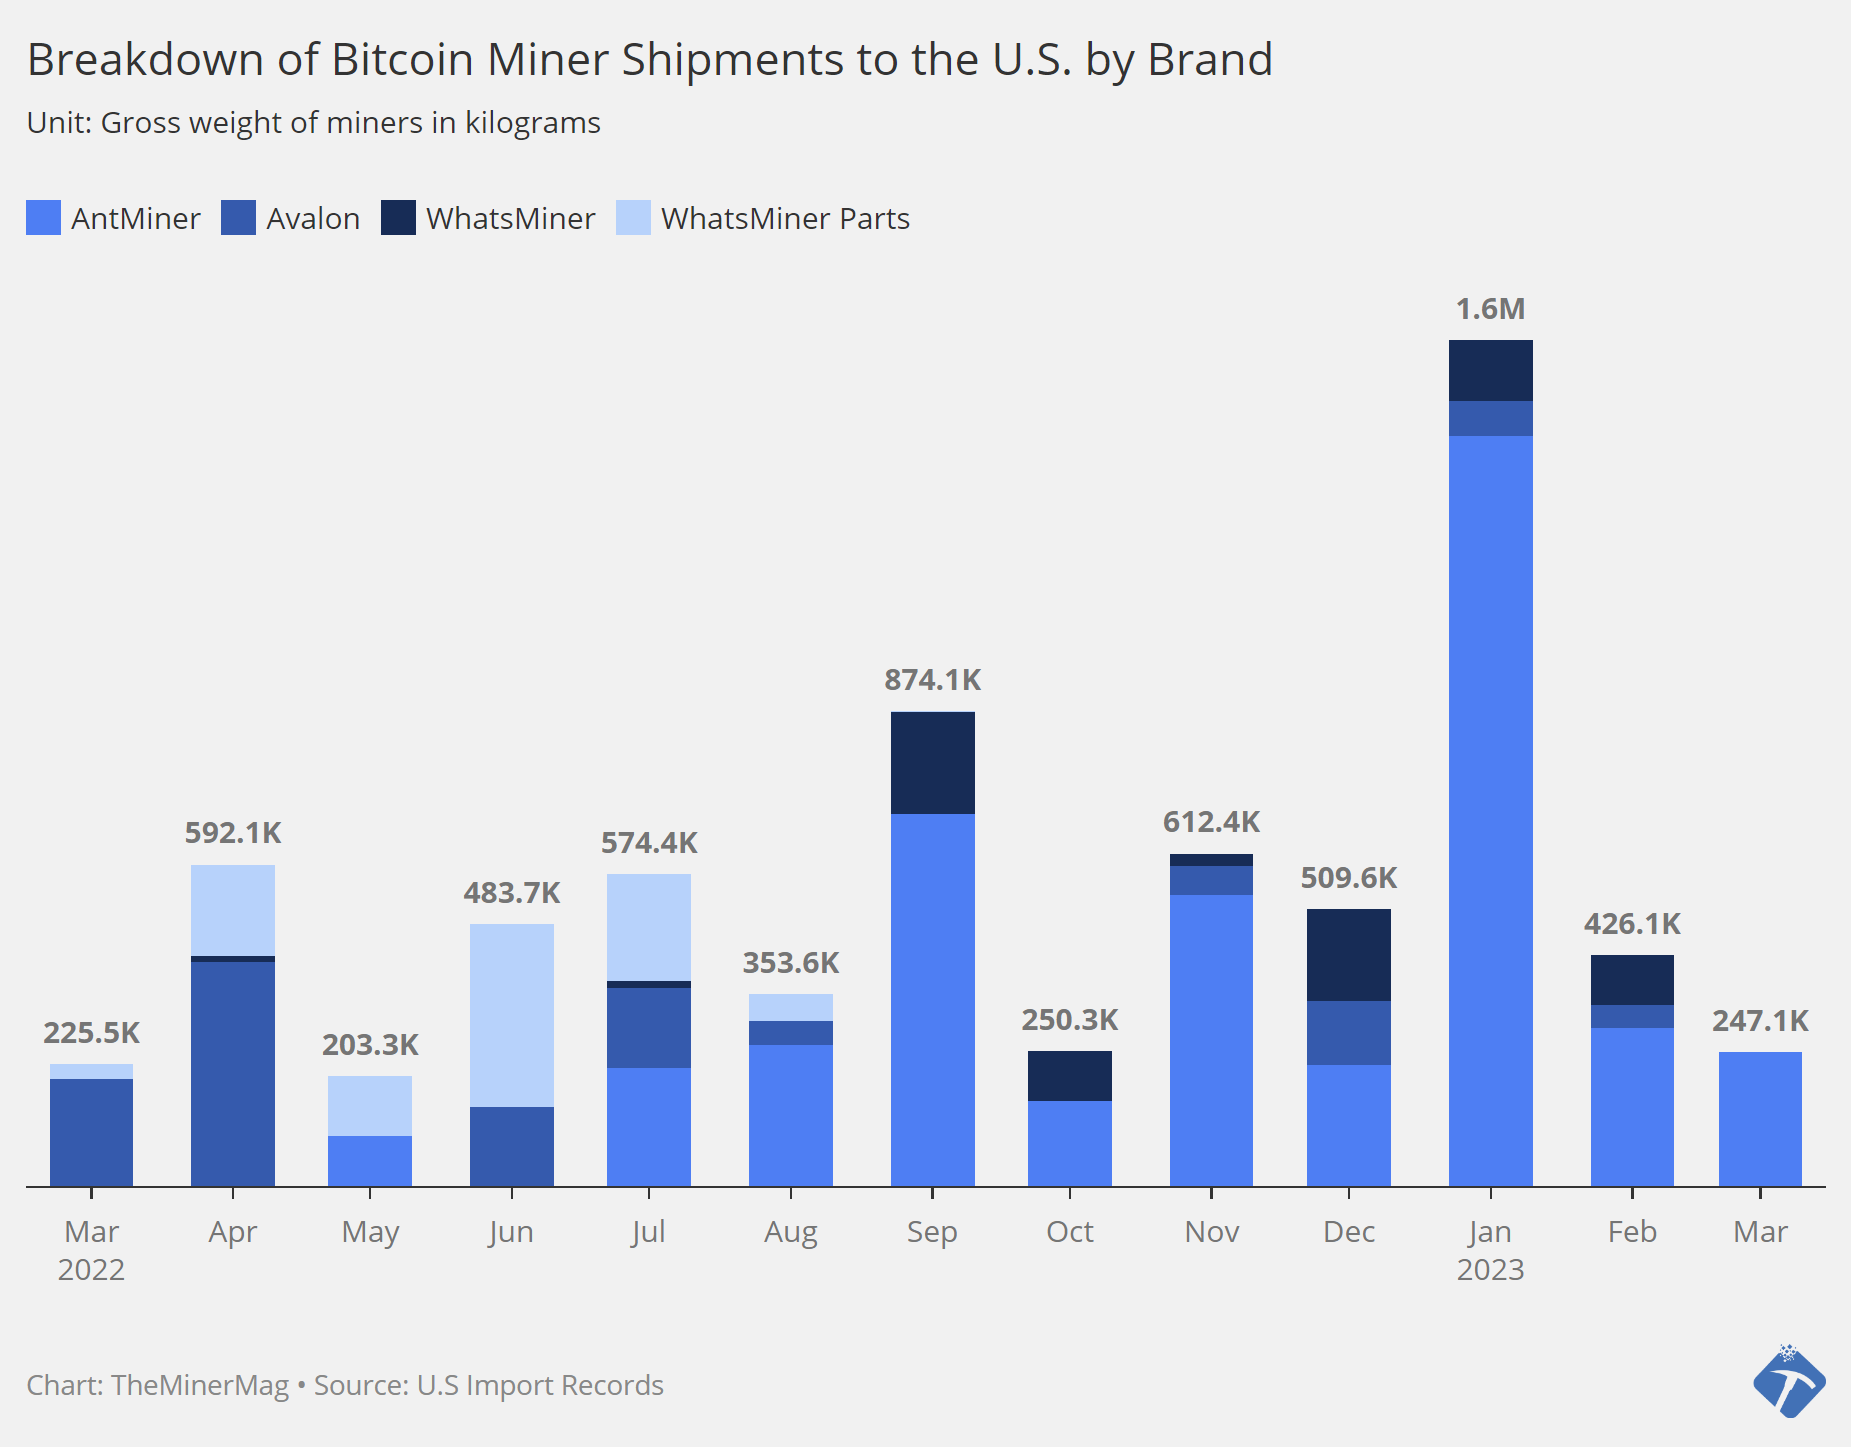 Bitcoin mining rig shippments to the US| Source: US Import Records, TheMinerMag